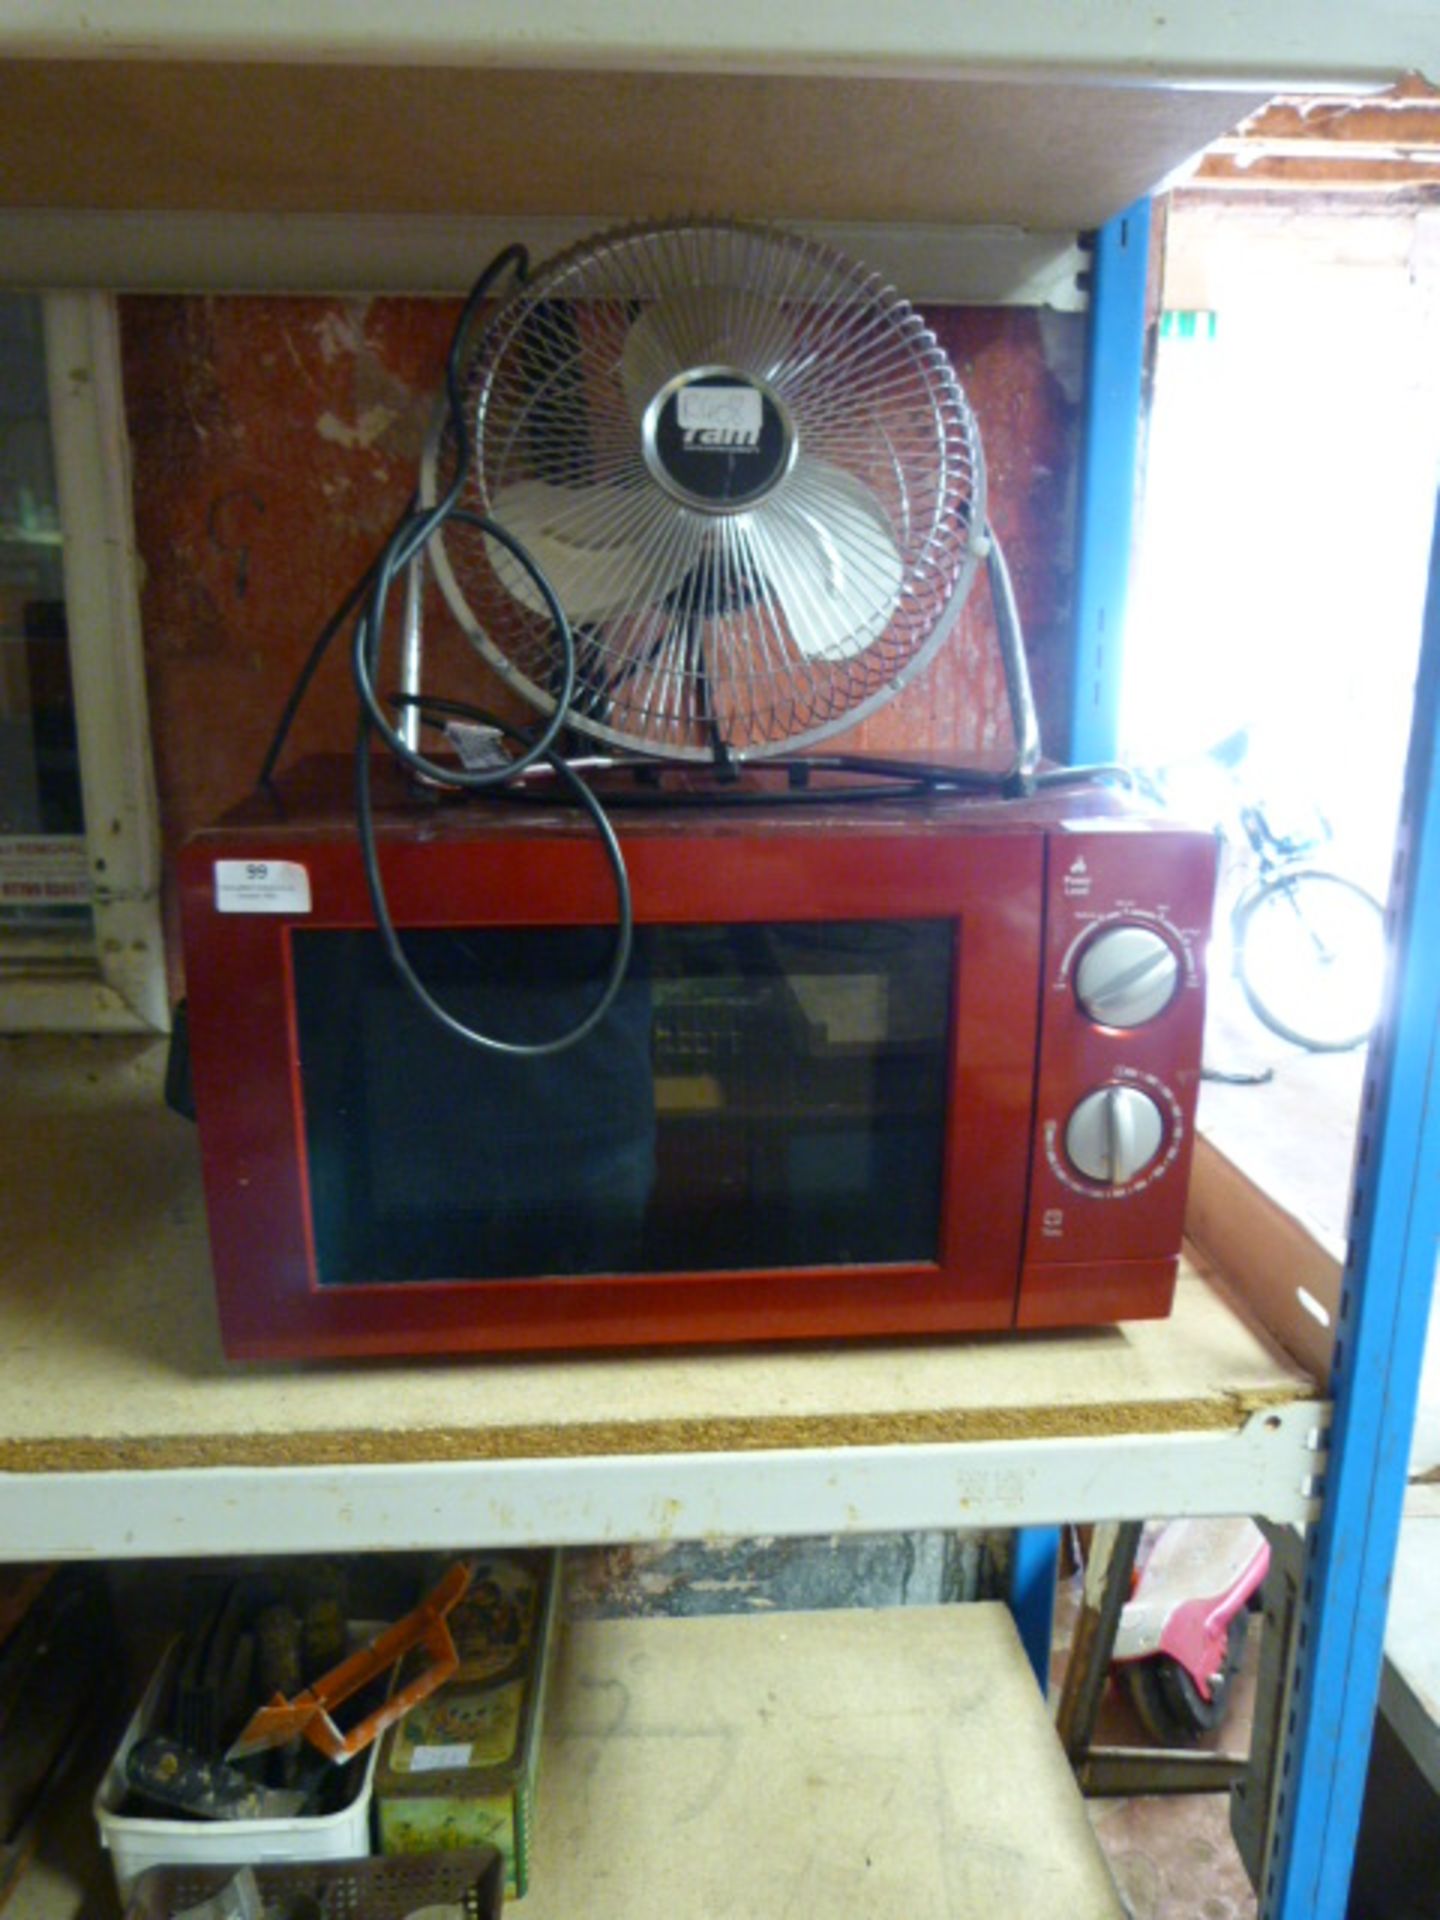 Domestic Microwave Oven and a Cooling Fan